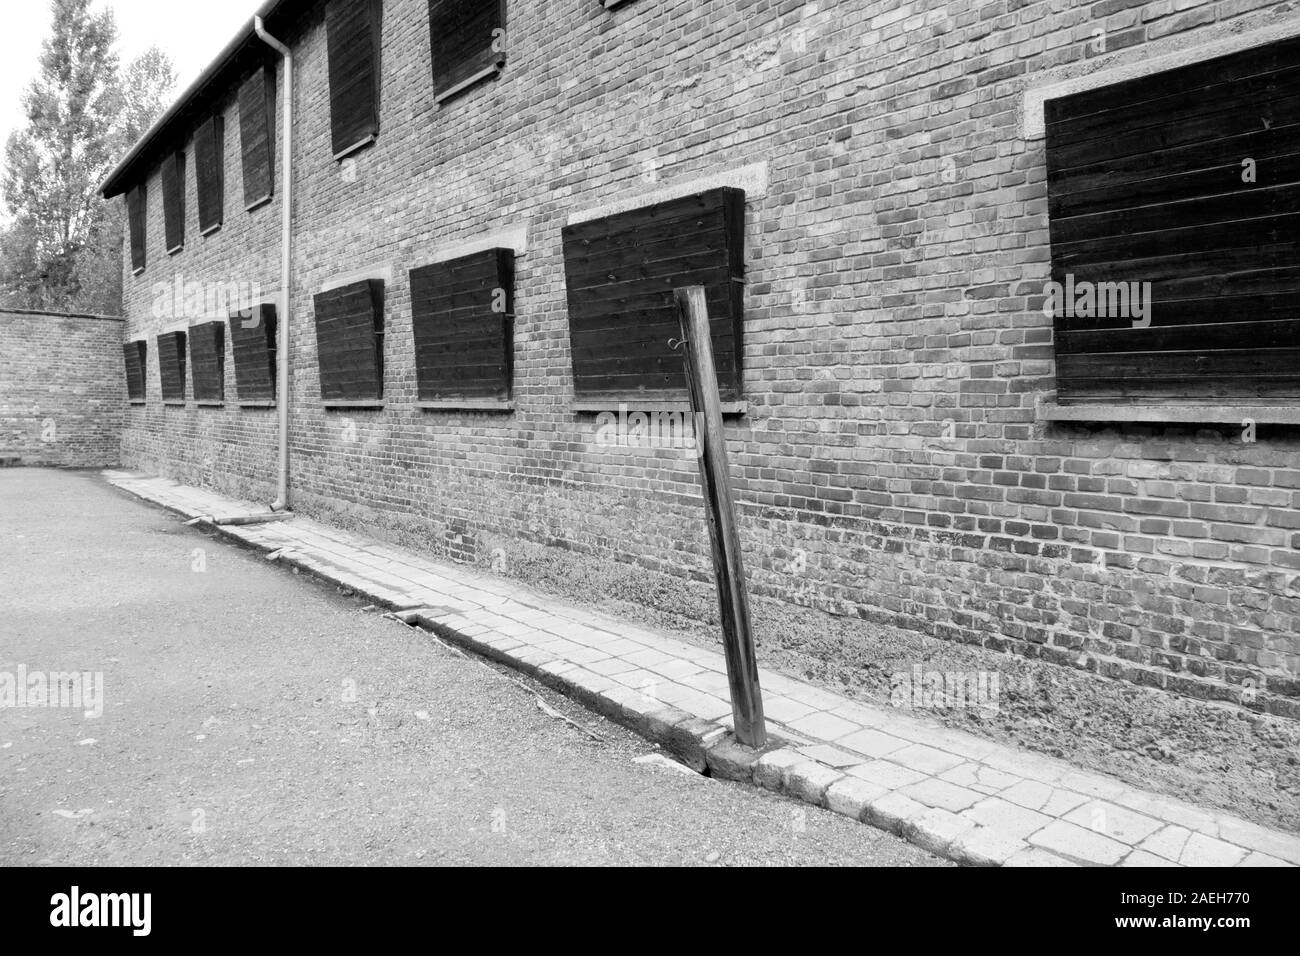 The Death Wall was where thousands of Polish prisoners were executed. Block 11 was a punishment, torture and execution prison inside Auschwitz I Conce Stock Photo